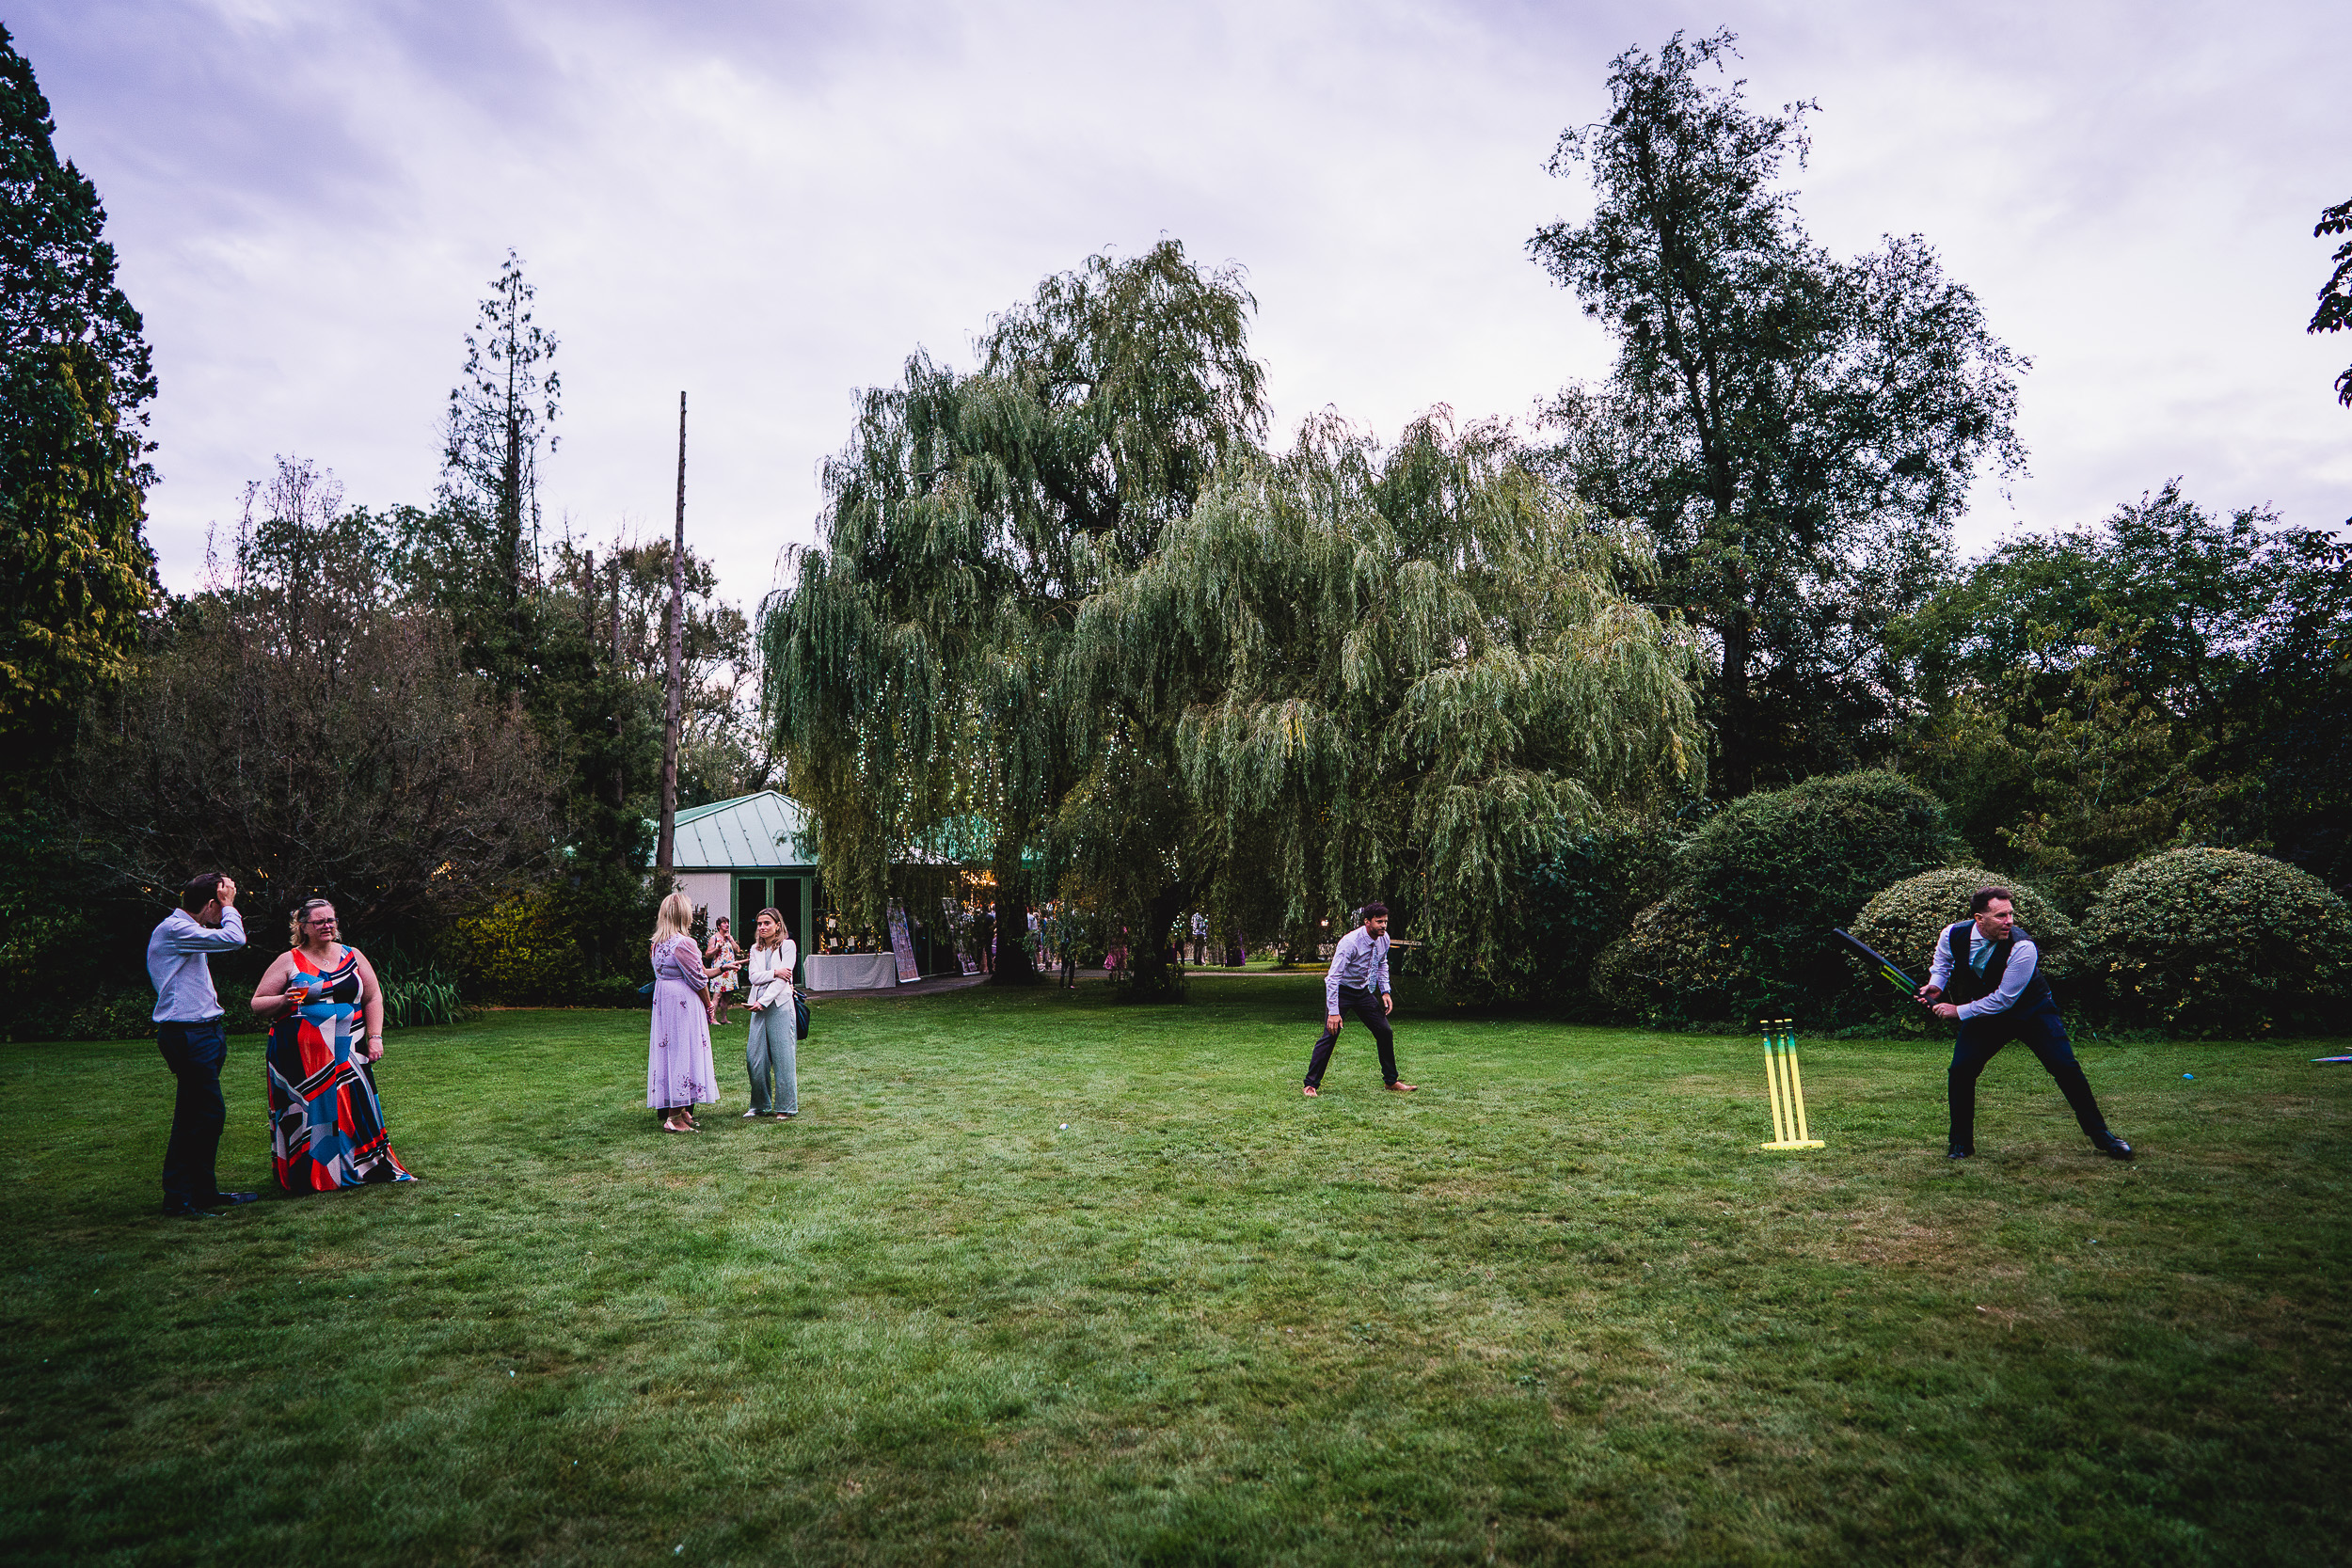 A group of people playing a game of cricket in Surrey Wedding.